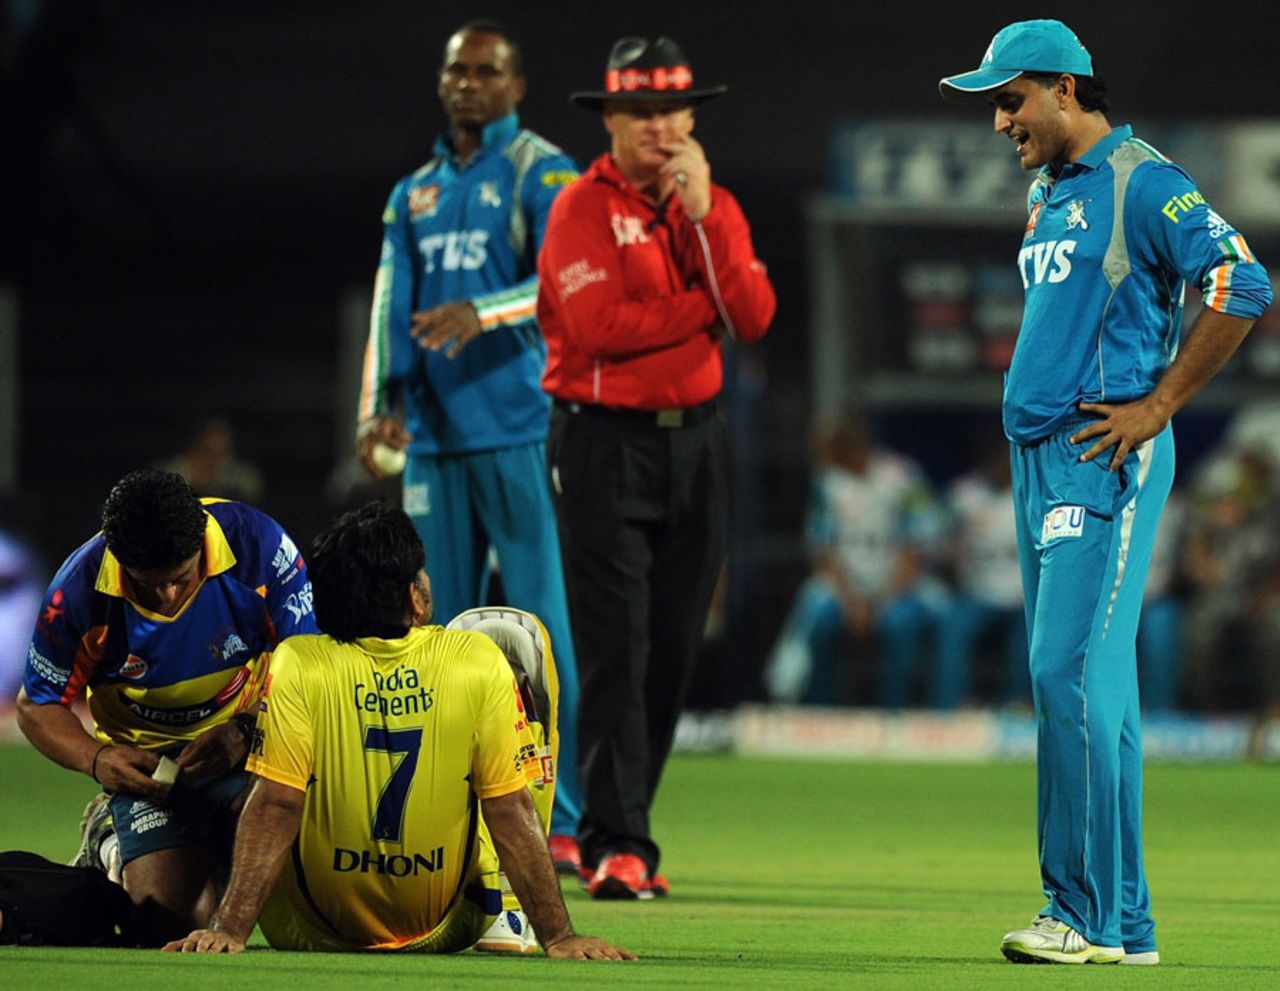 MS Dhoni chats with Sourav Ganguly while getting some treatment, Pune Warriors v Chennai Super Kings, IPL 2012, Pune, April 14, 2012